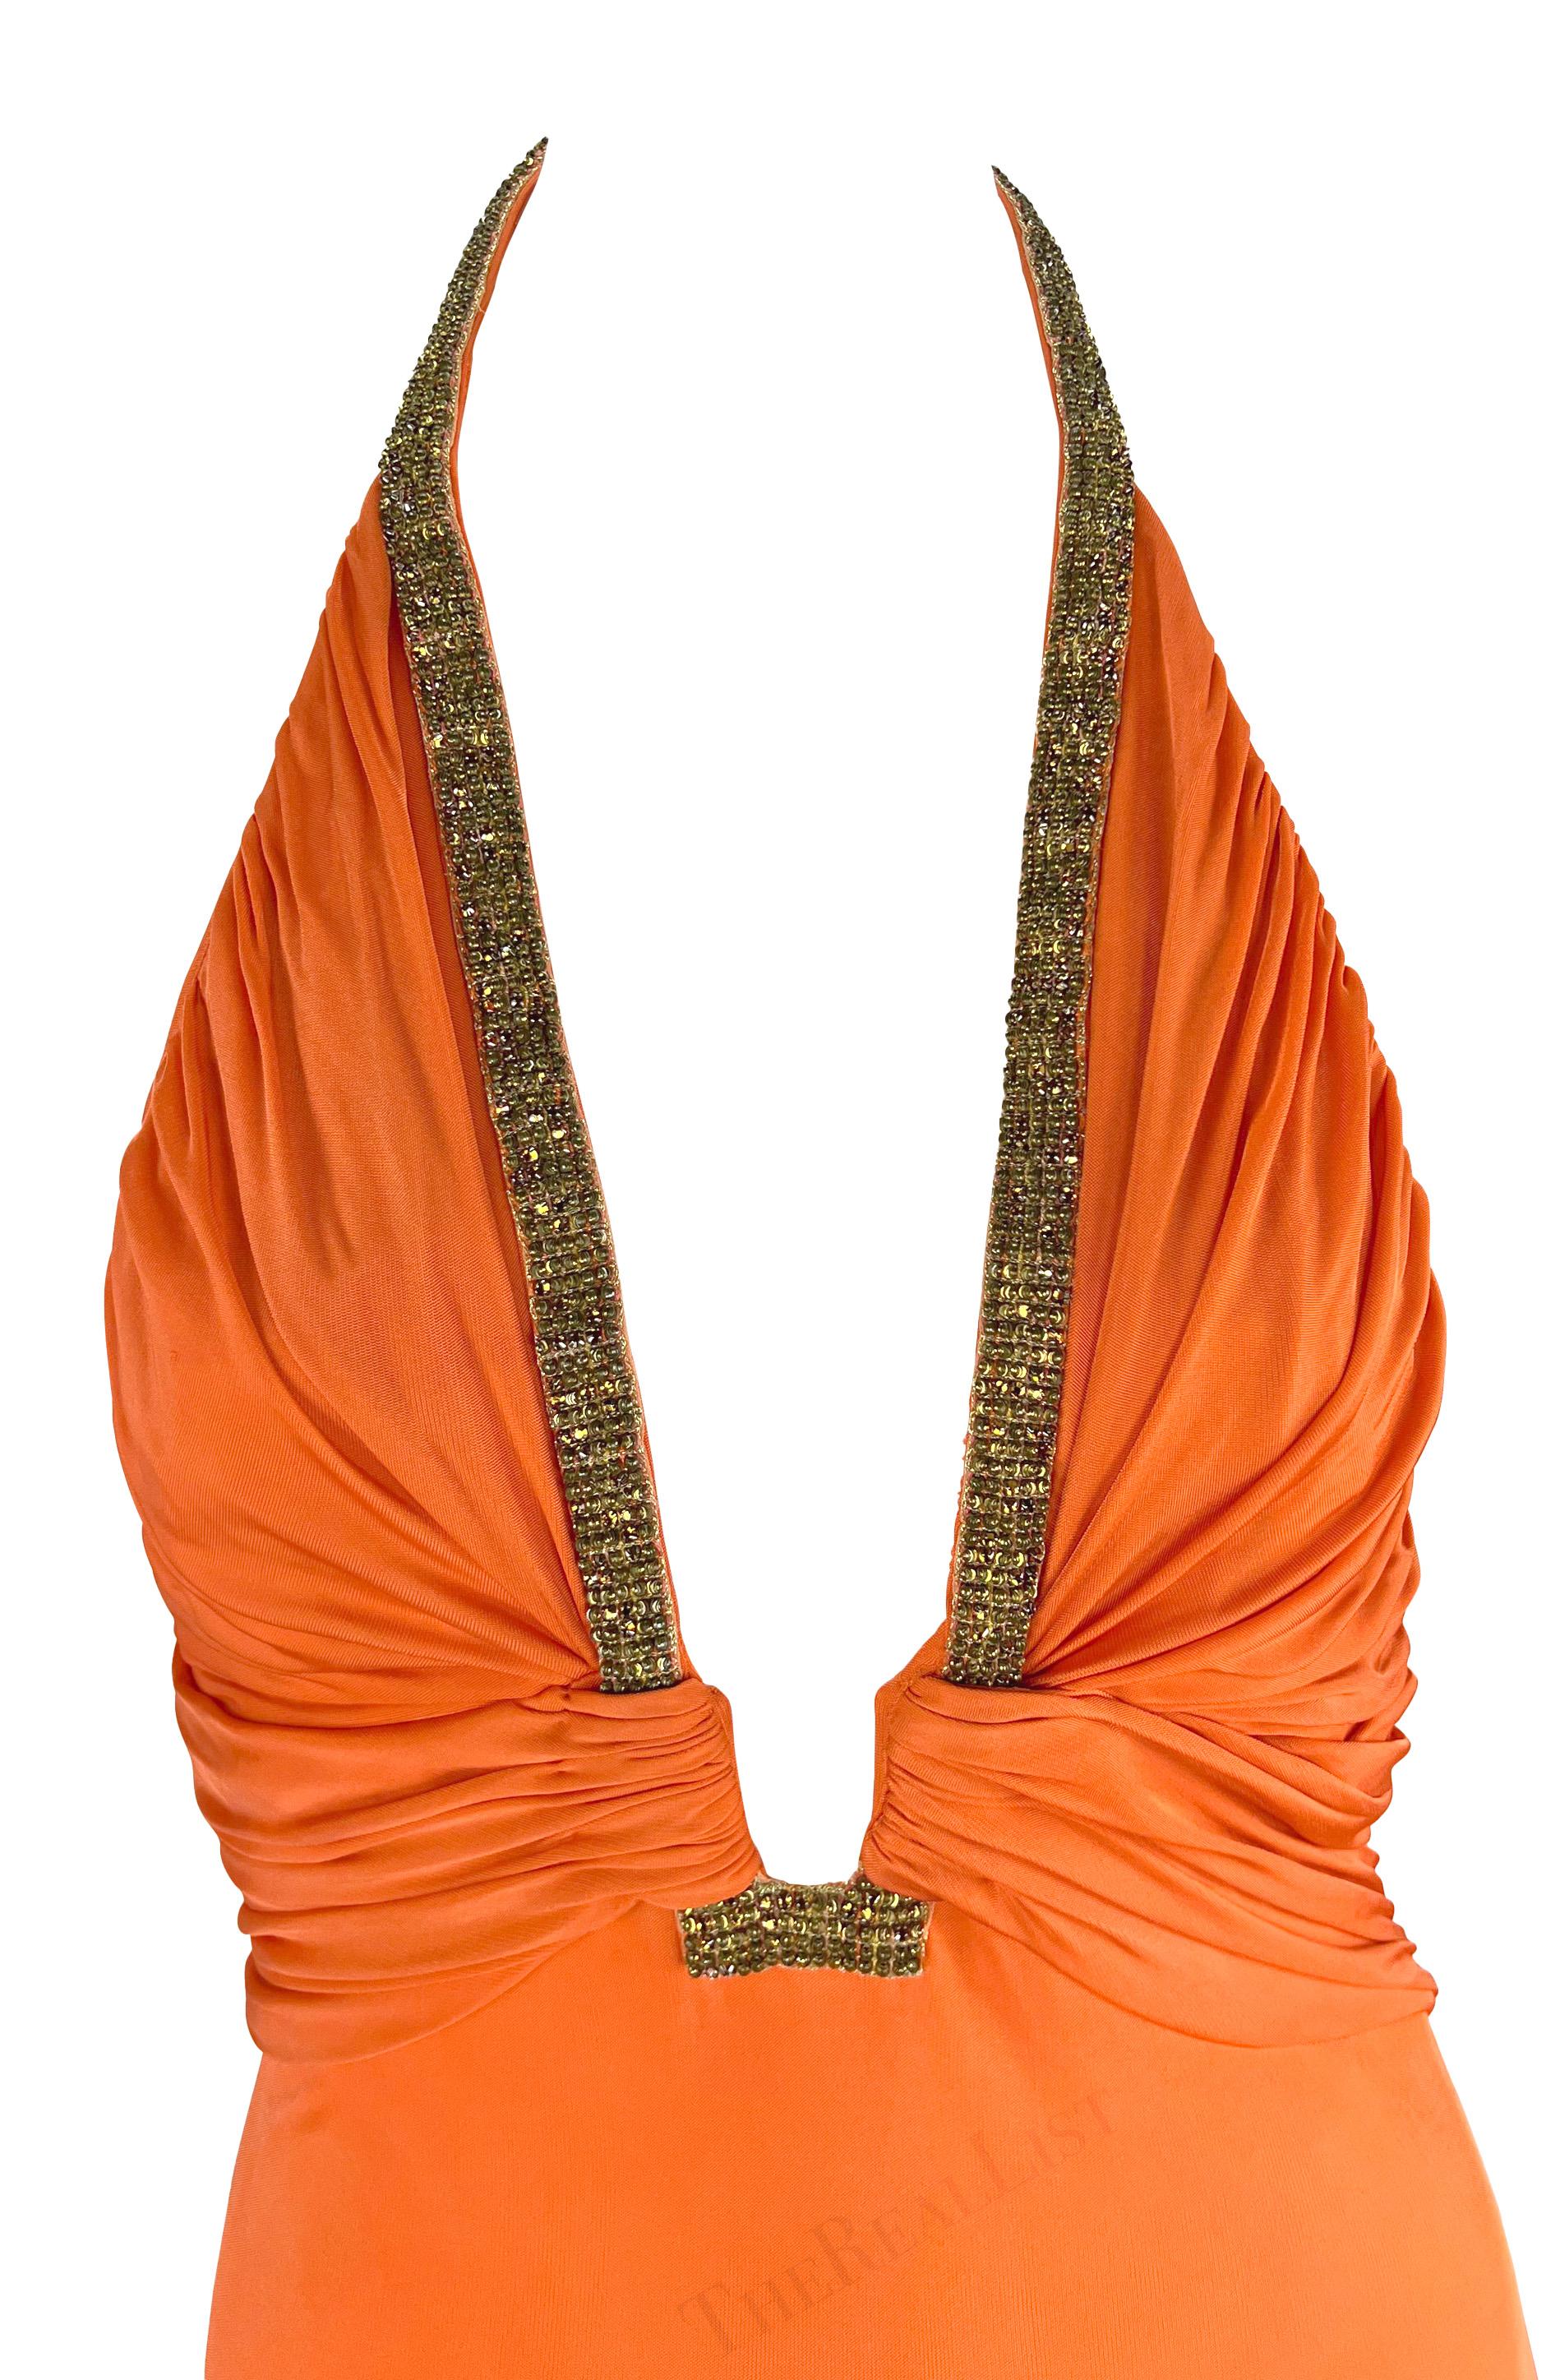 This beautiful orange Roberto Cavalli halterneck gown from the Spring/Summer 2005 collection features ruching gathered at the plunging neckline, highlighted by intricate brassy sequins interspersed with amber rhinestones. The viscose blend fabric